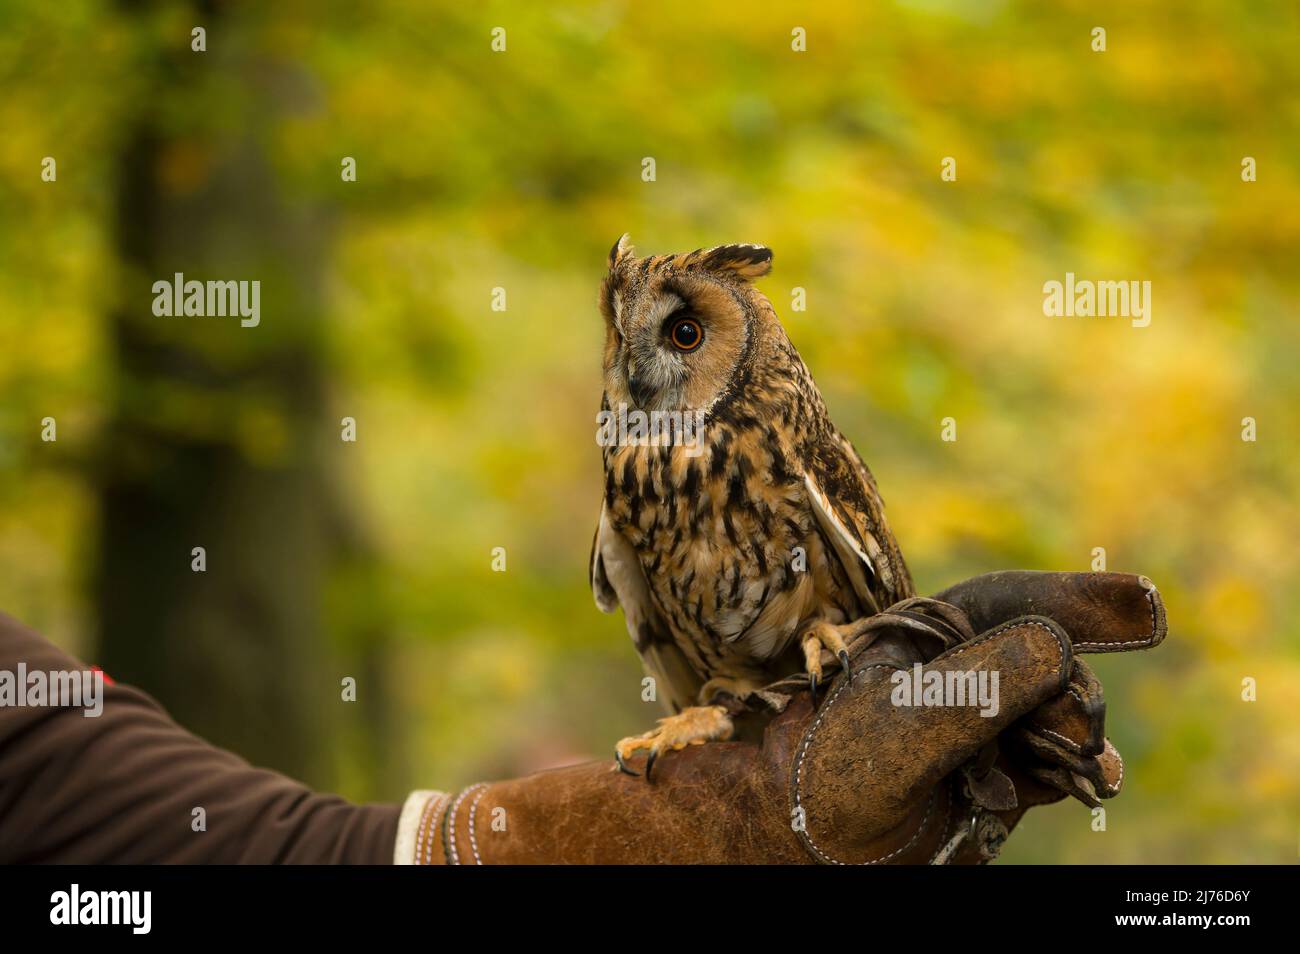 Long-eared owl (Asio otus), sitting on falconer's leather glove, captive, colorful autumn leaves in background, Bispingen Bird of Prey Enclosure, Lüneburger Heide, Germany, Lower Saxony Stock Photo